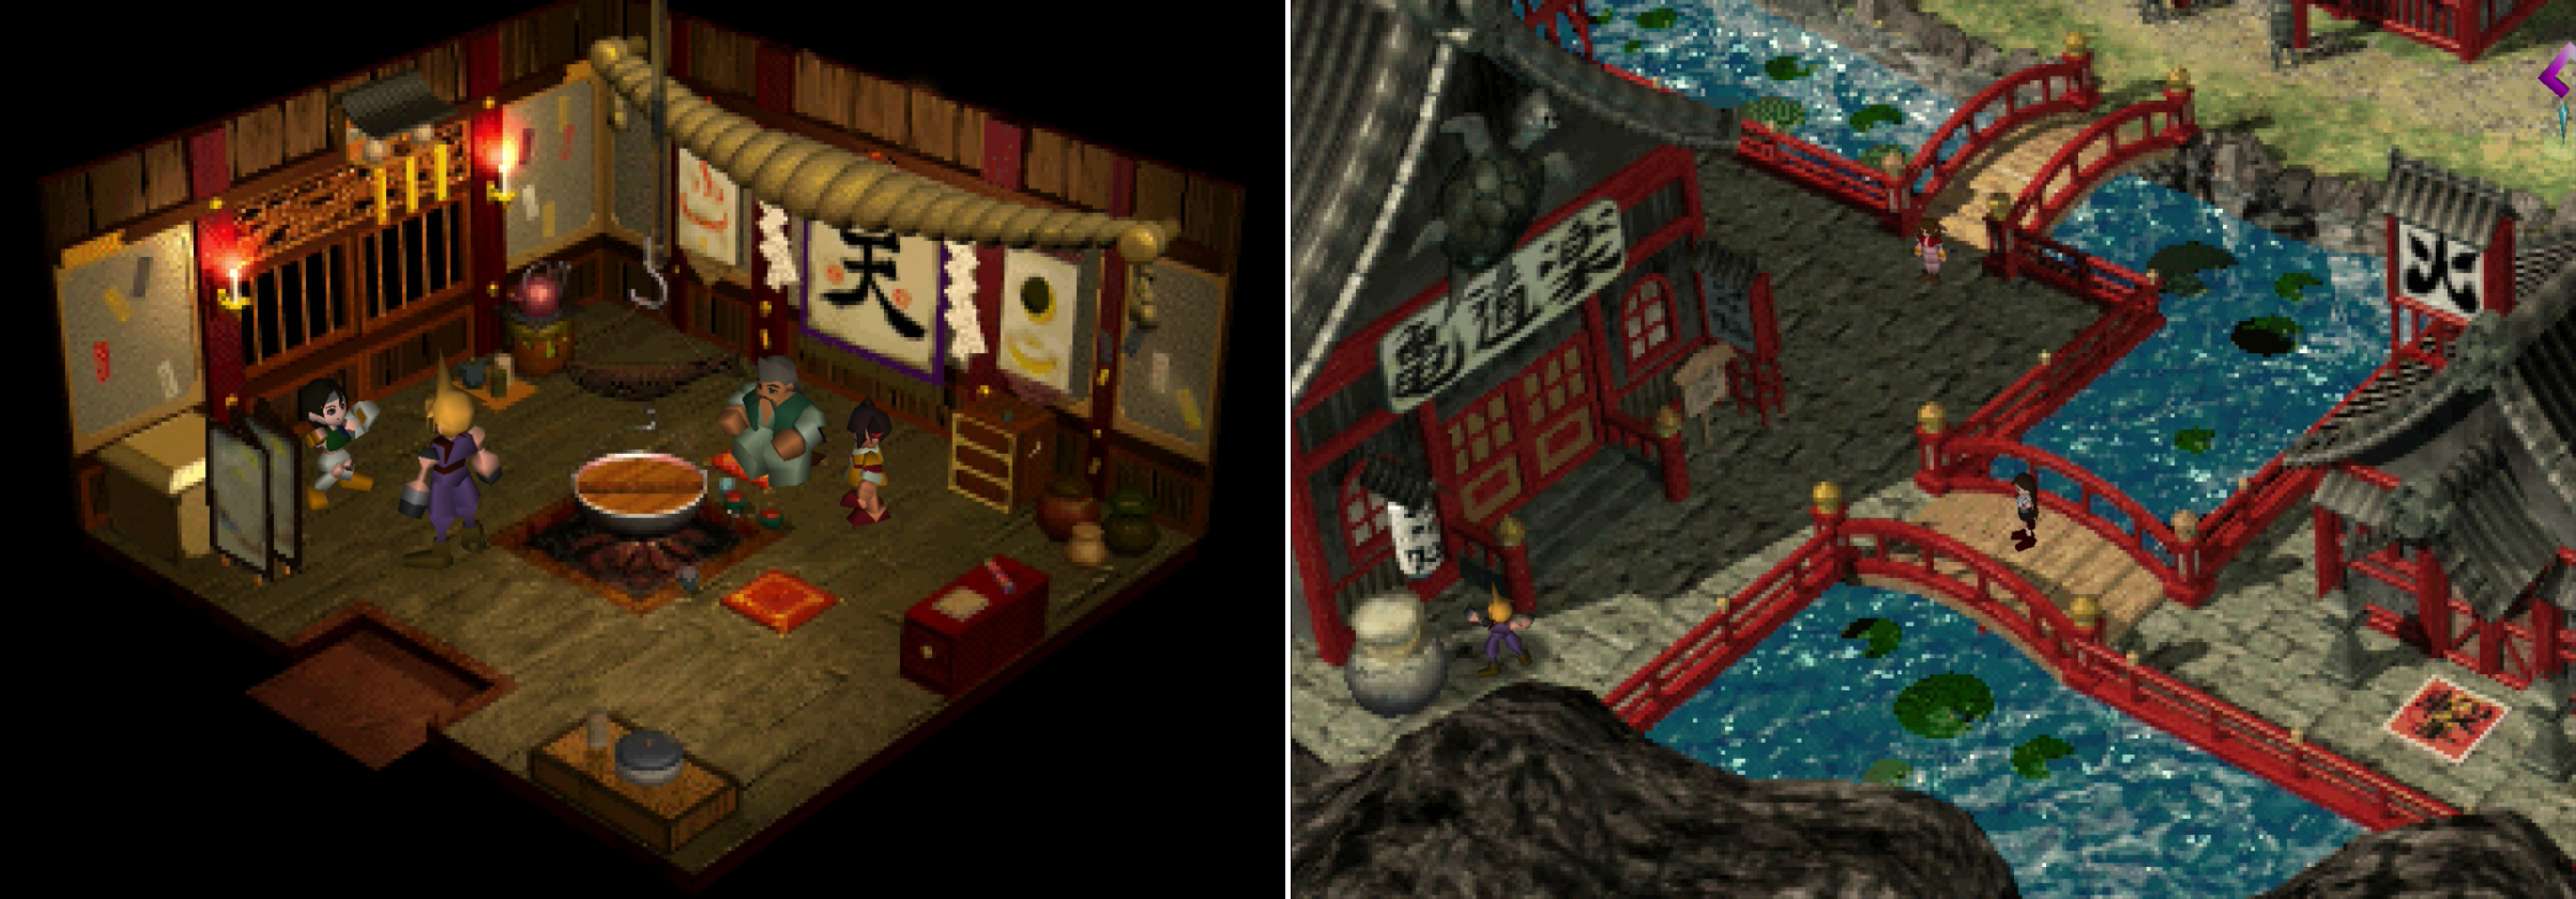 Find Yuffie lurking behind a screen (left), then set up an ambush for her as she hides in an urn near the Turtle’s Paradise (right).